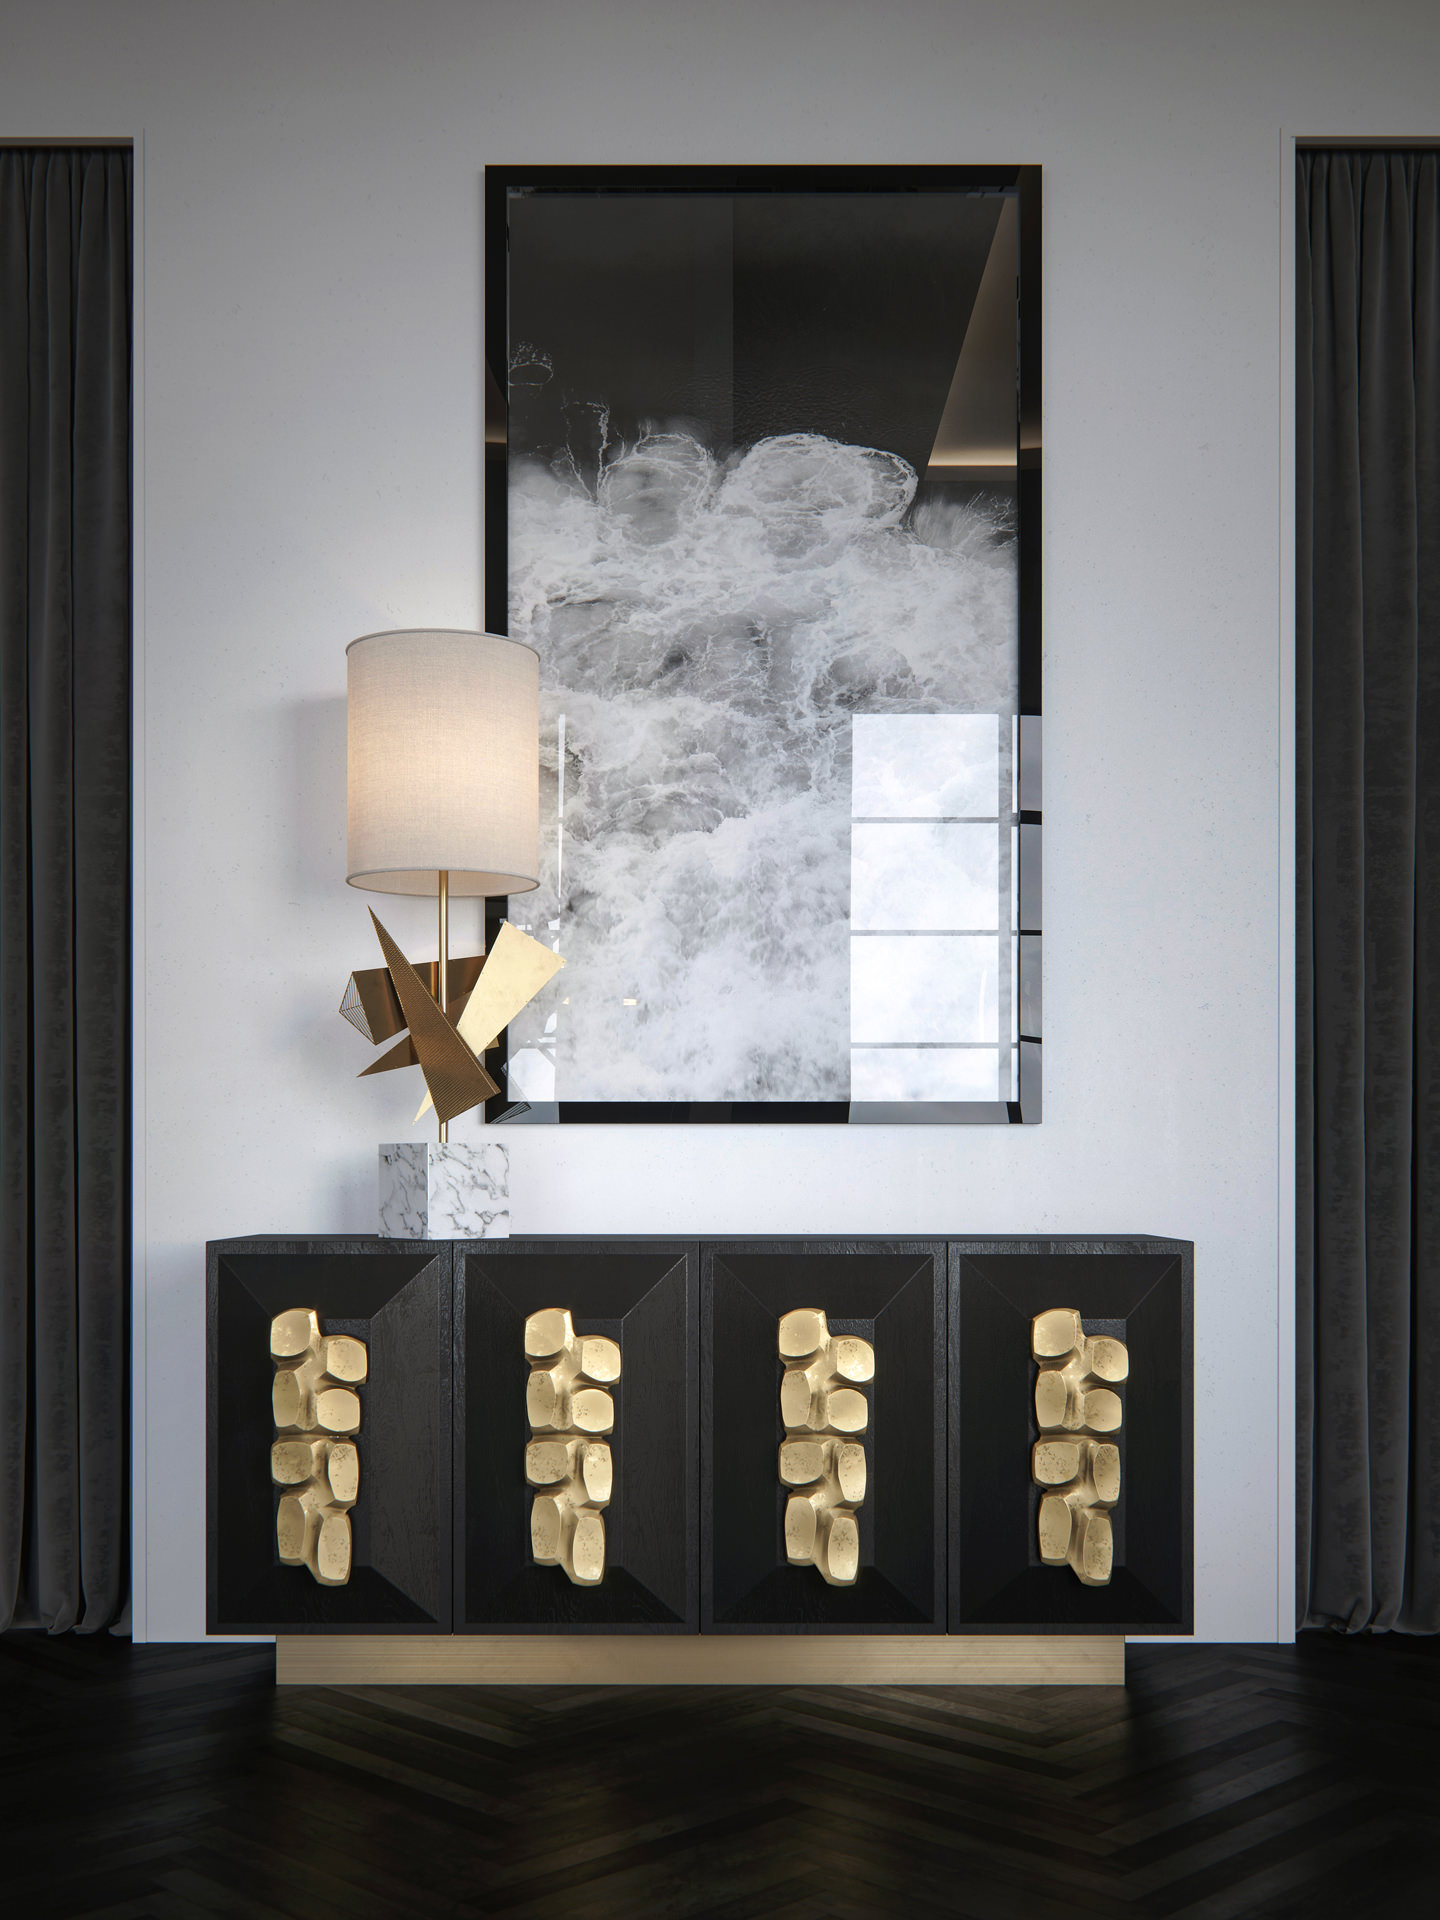 3D furniture rendering of a black wooden cabinet with golden stone-like handles with an artpiece lamp standing on top of it and a black-and-white photo of the ocean waves hanging in the minimalistic black plastic frame